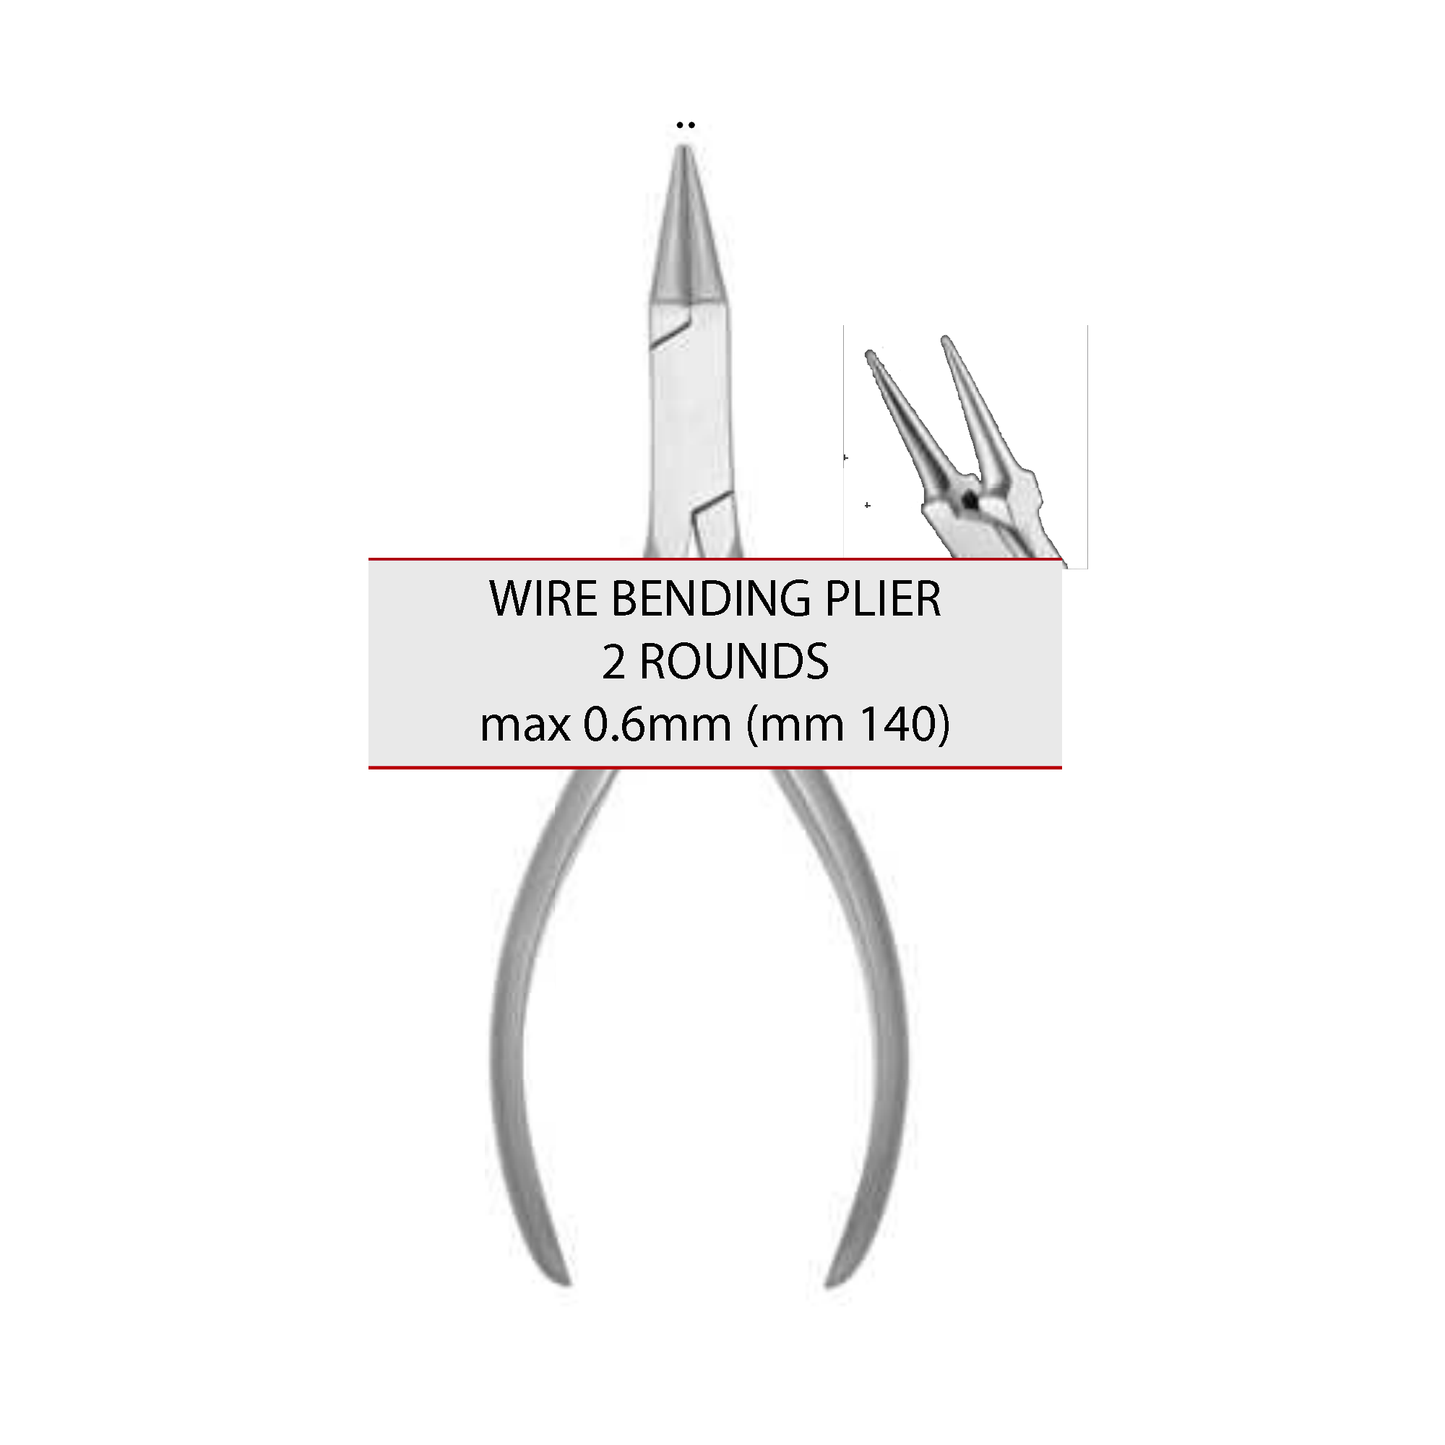 2 ROUNDS – MAX 0.6mm (mm 140) Cod 1023-7